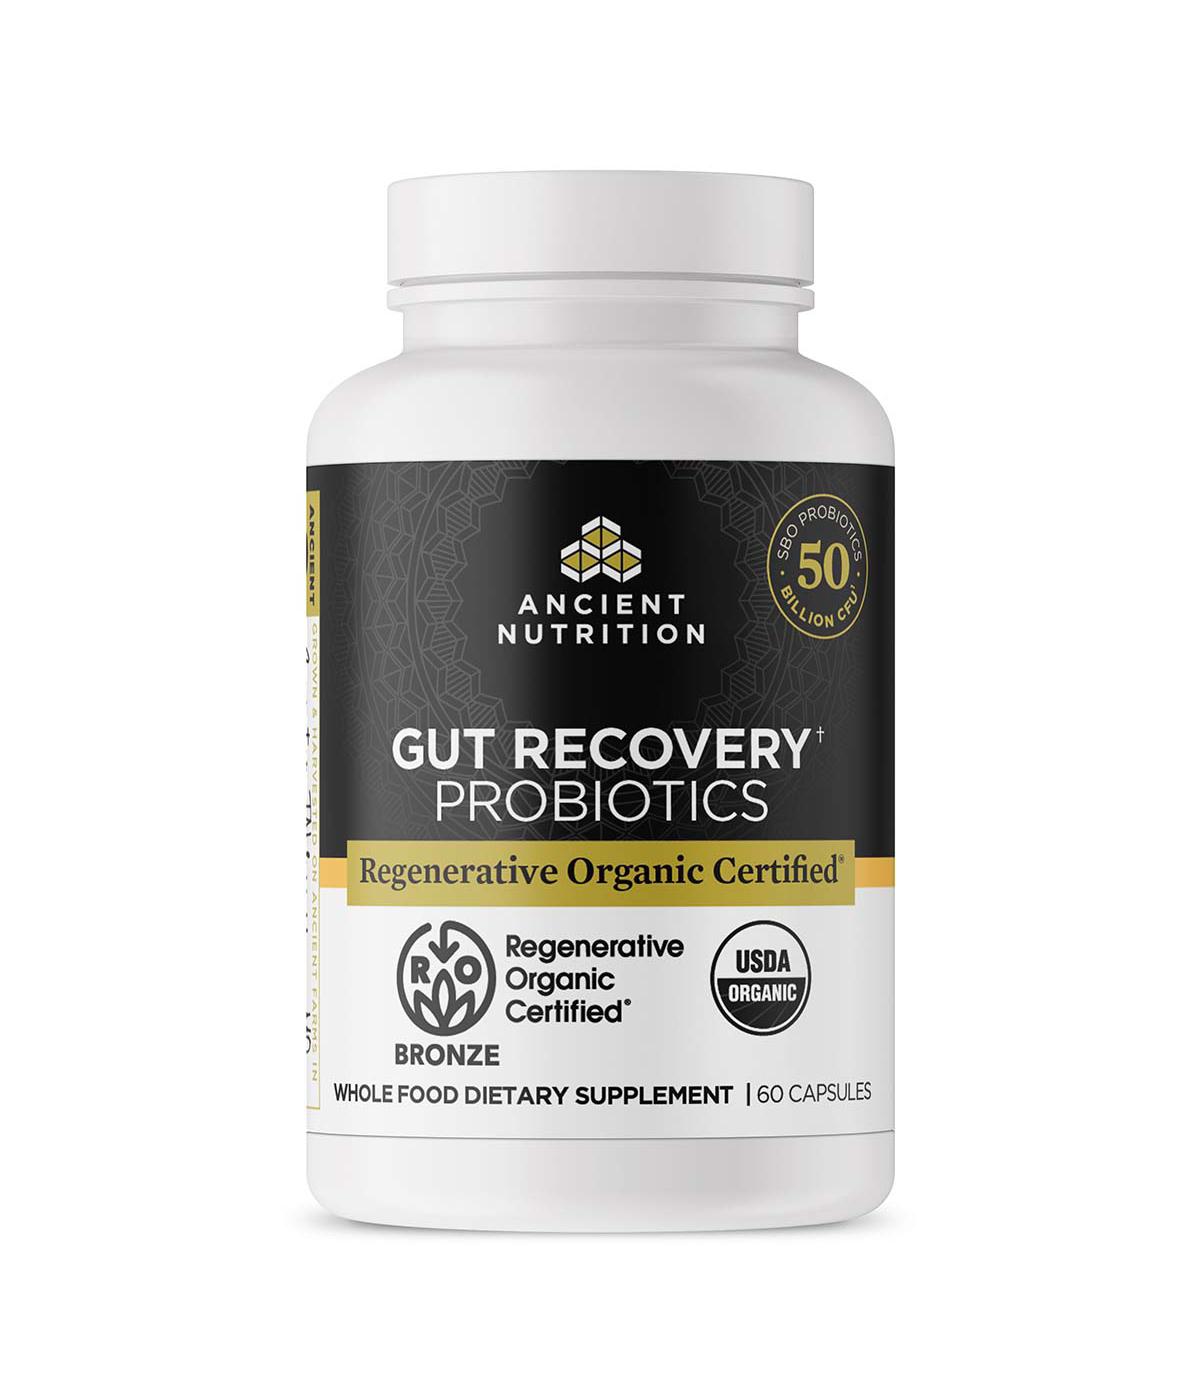 Ancient Nutrition Gut Recovery Probiotics Capsules; image 2 of 5